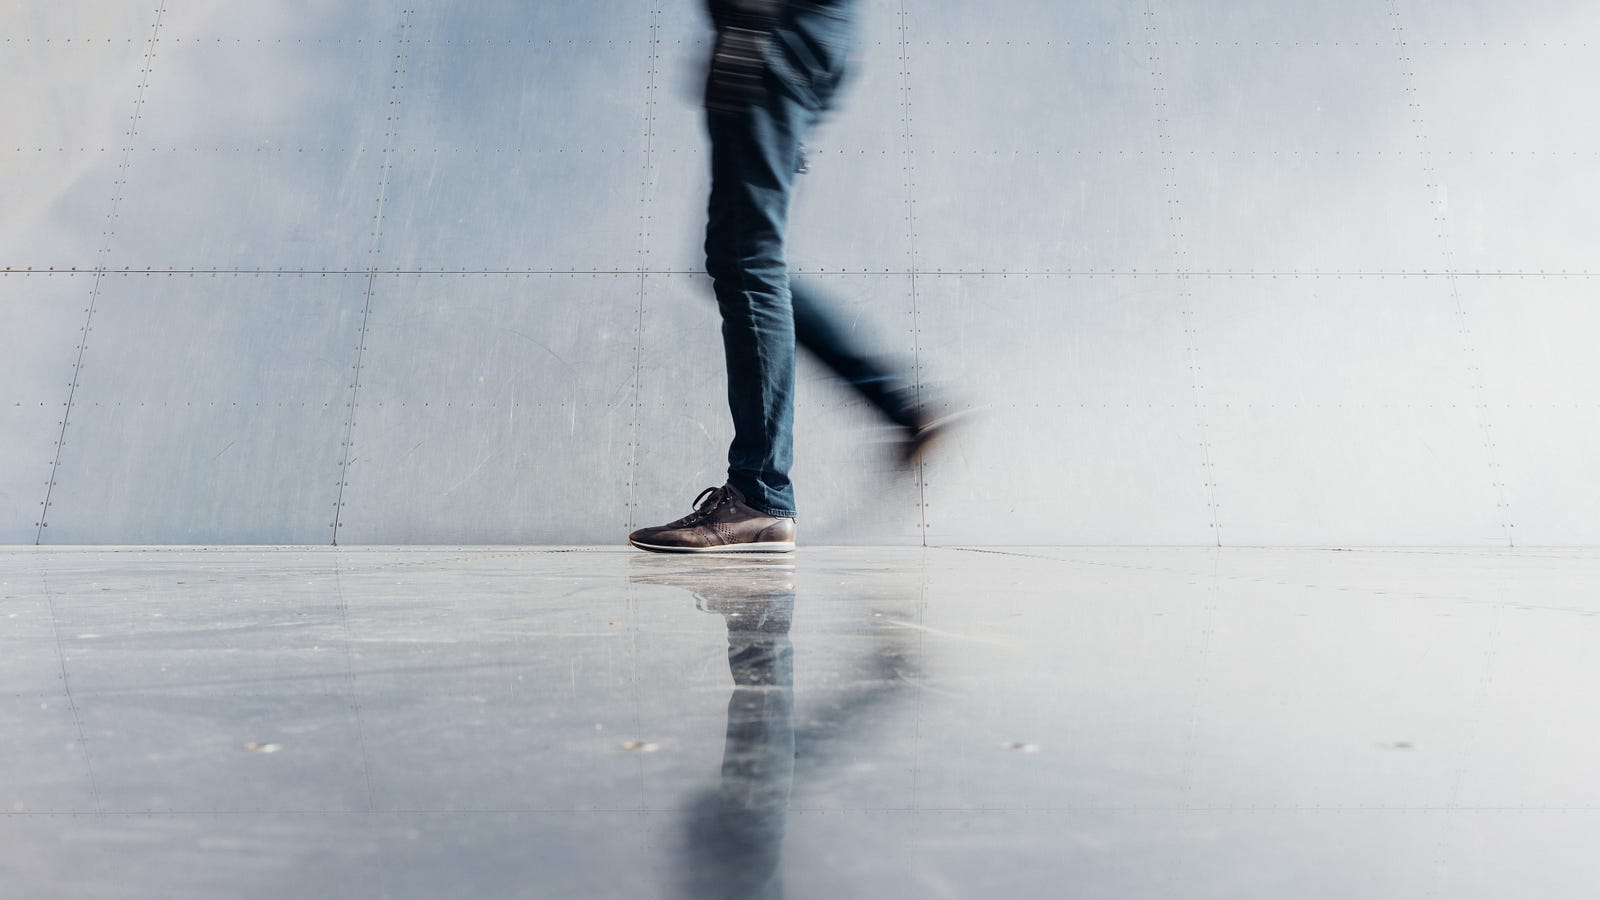 We see a person (from mid-abdomen level down) walking from right to left. S/he wears jeans. The image is slightly blurred, highlighting the movement. There is a building wall (bluish-white) in the background. Walking (or any physical activity) can lower colorectal cancer risk.